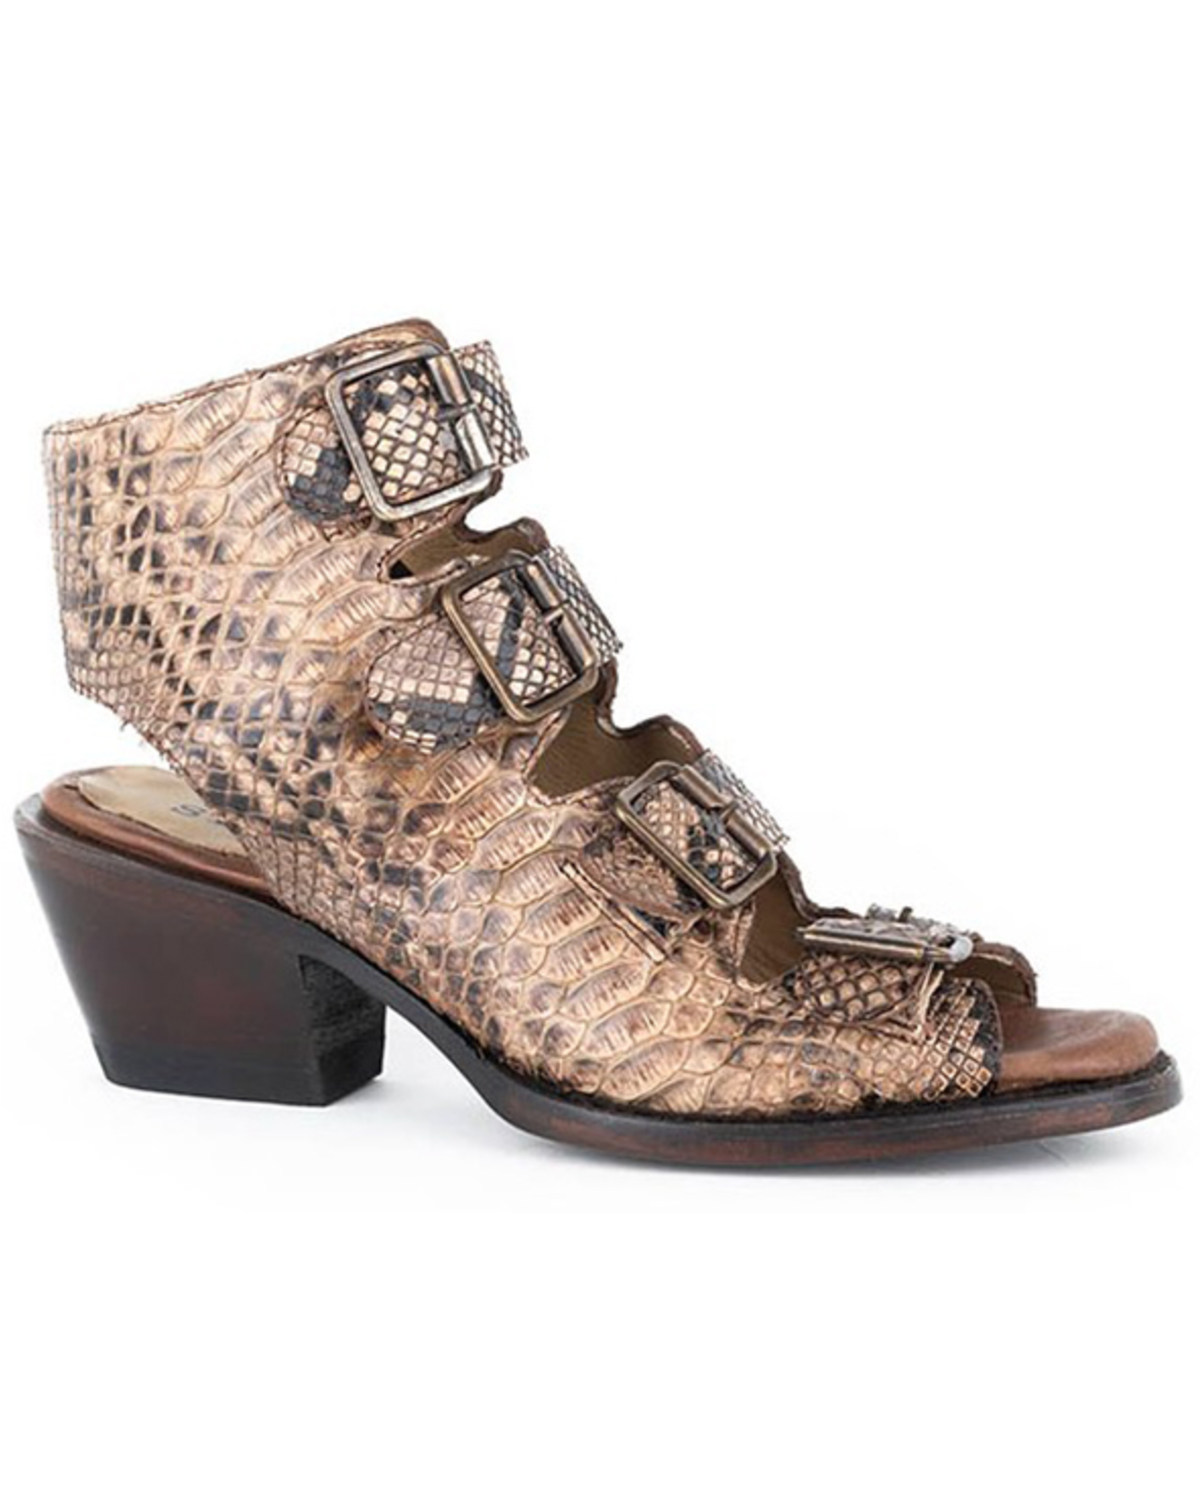 Stetson Women's Indie Exotic Python Western Booties - Round Toe